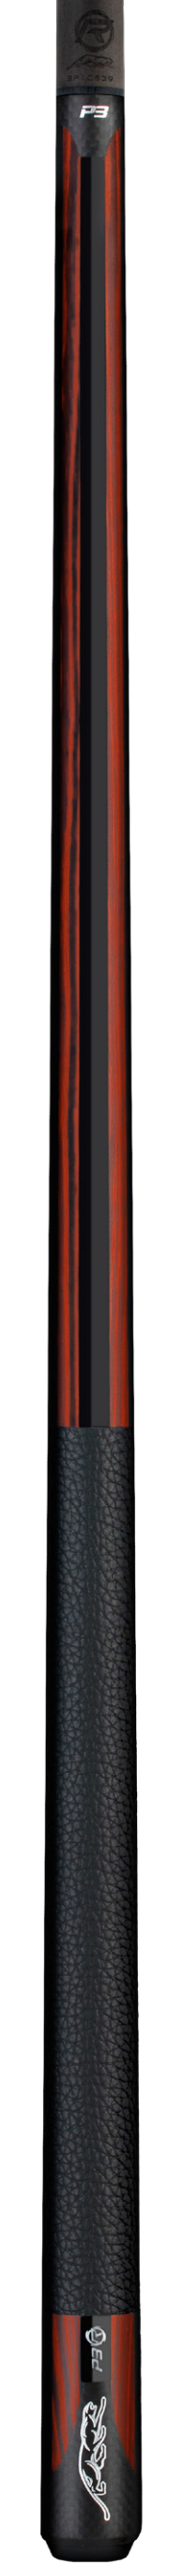 Predator Limited P3 Red Tiger Pool Cue - Leather Luxe Wrap -Predator